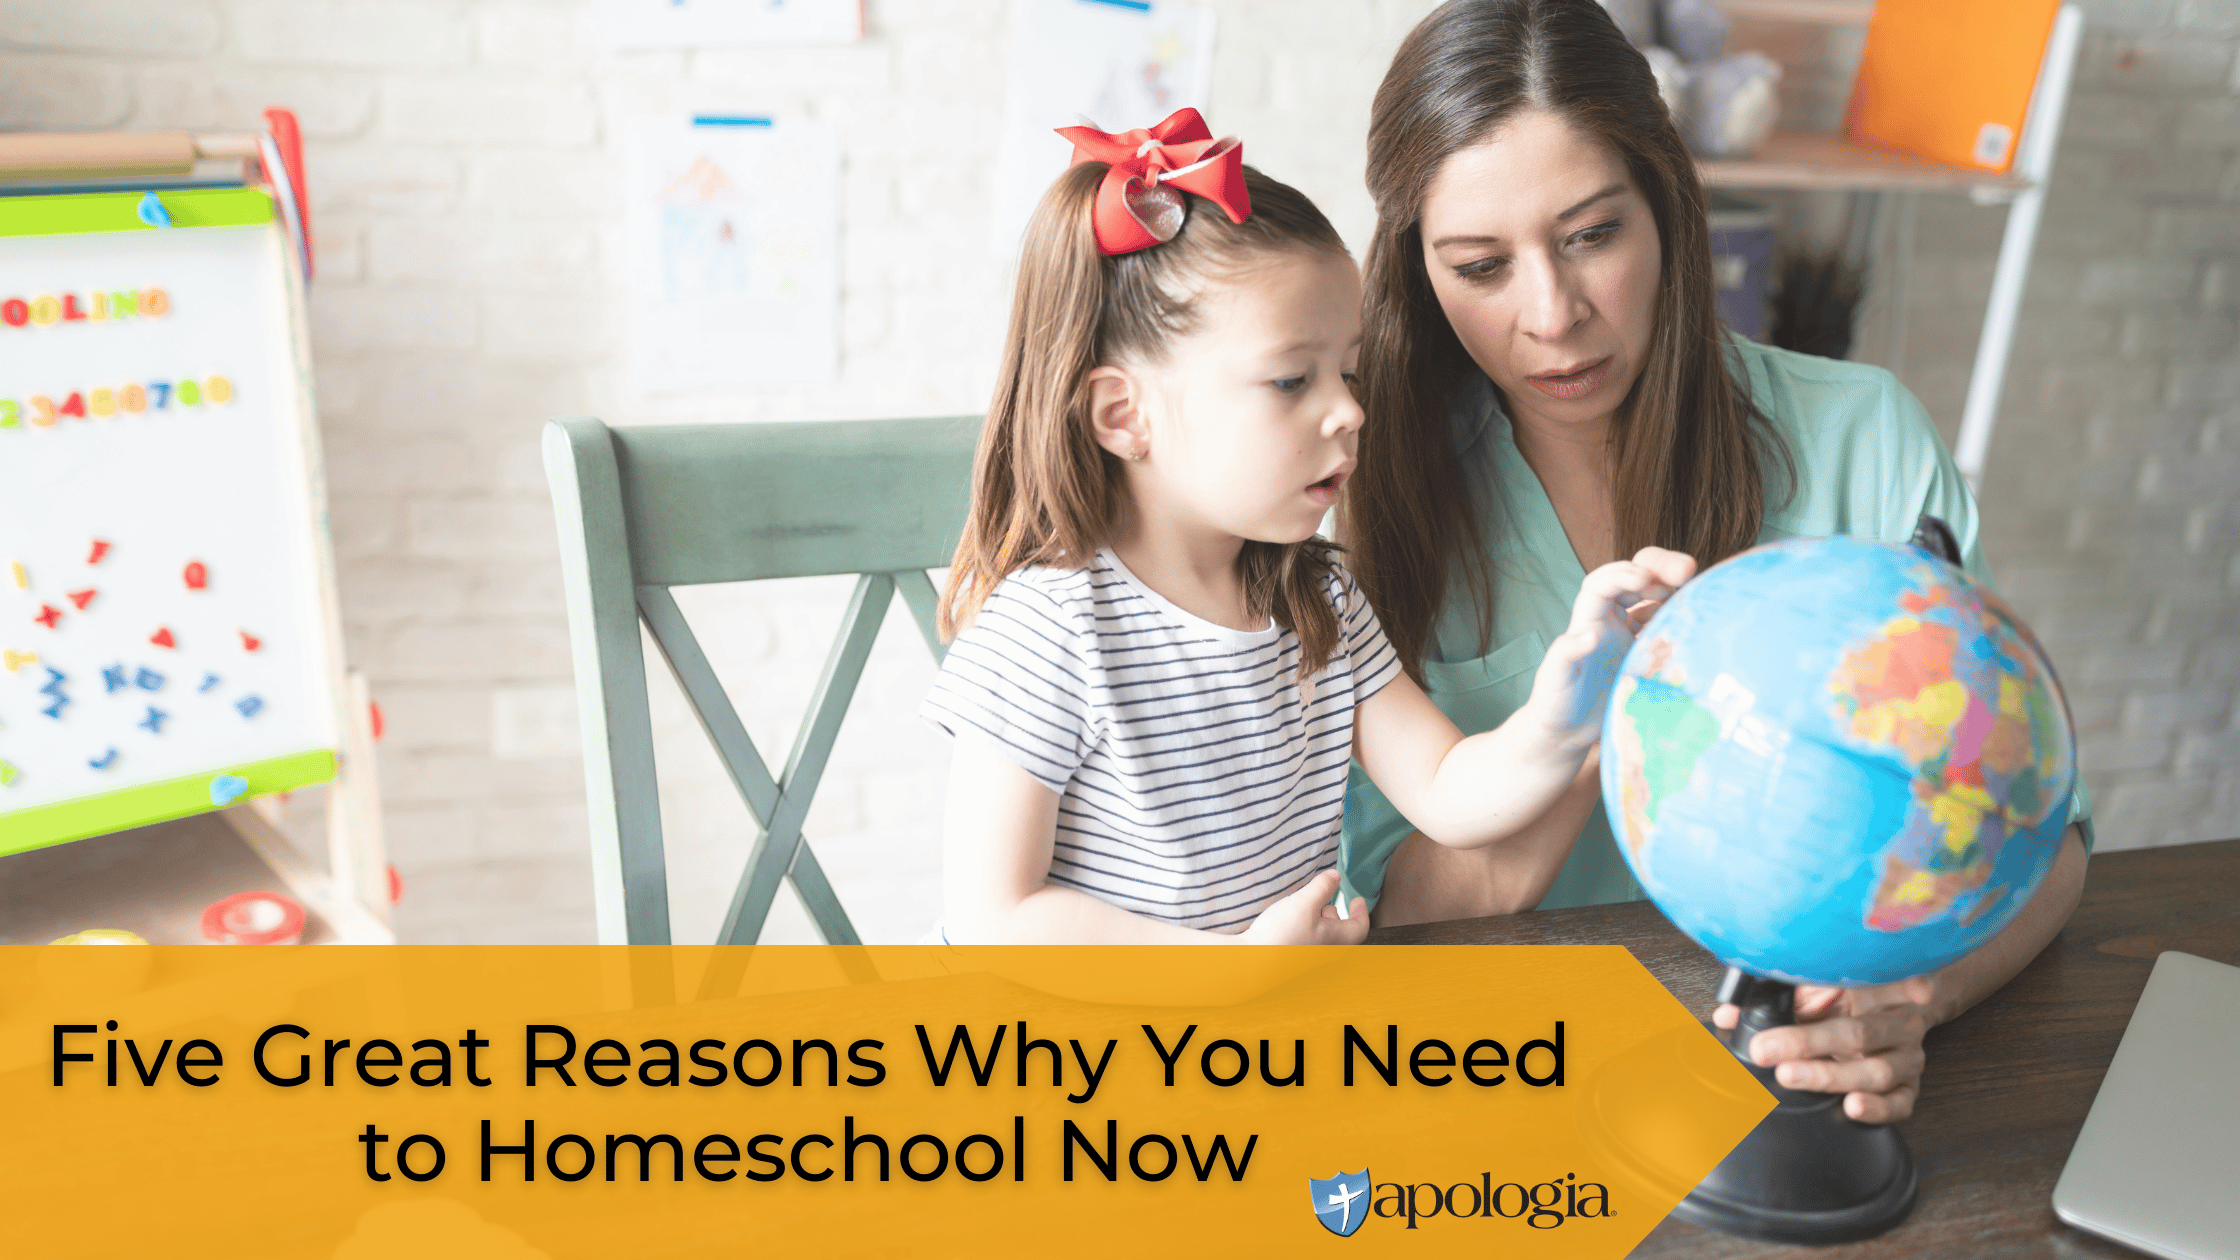 Five Great Reasons Why You Need to Homeschool Now